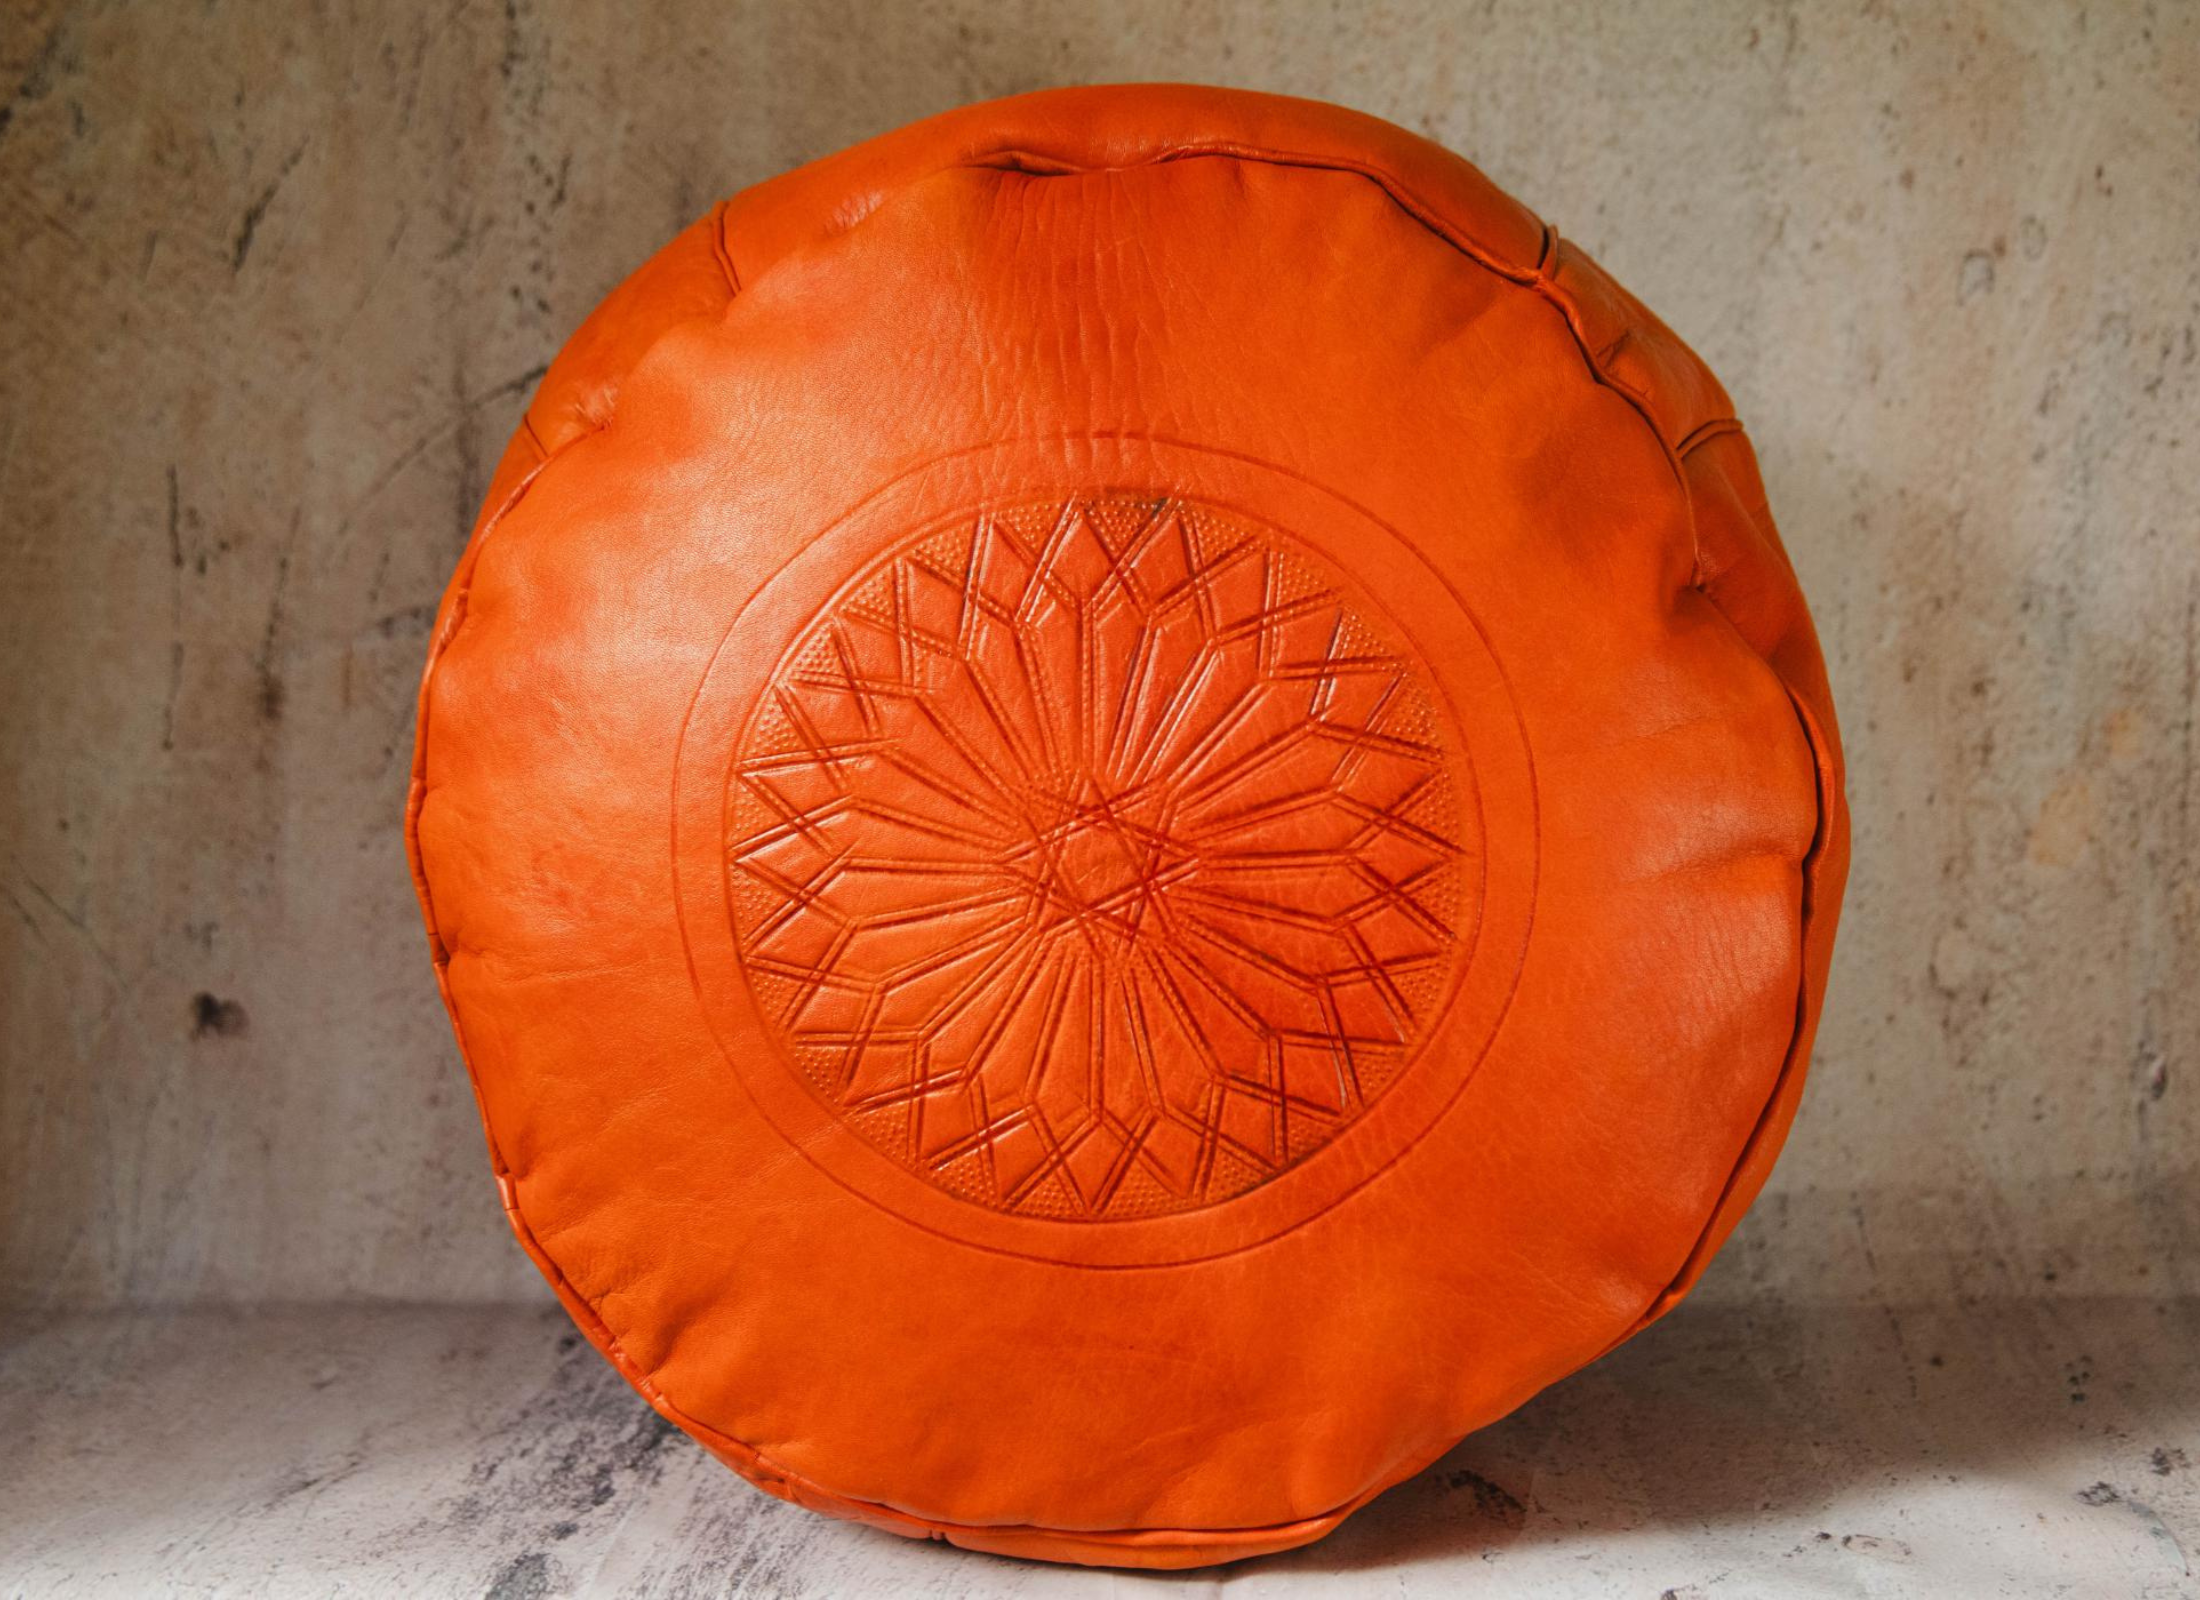 Moroccan Leather Pouf in Tan - Leather Poufe Ottoman Moroccan Floor Pouffs, Morocco Pouffe - Ottomans Poufs